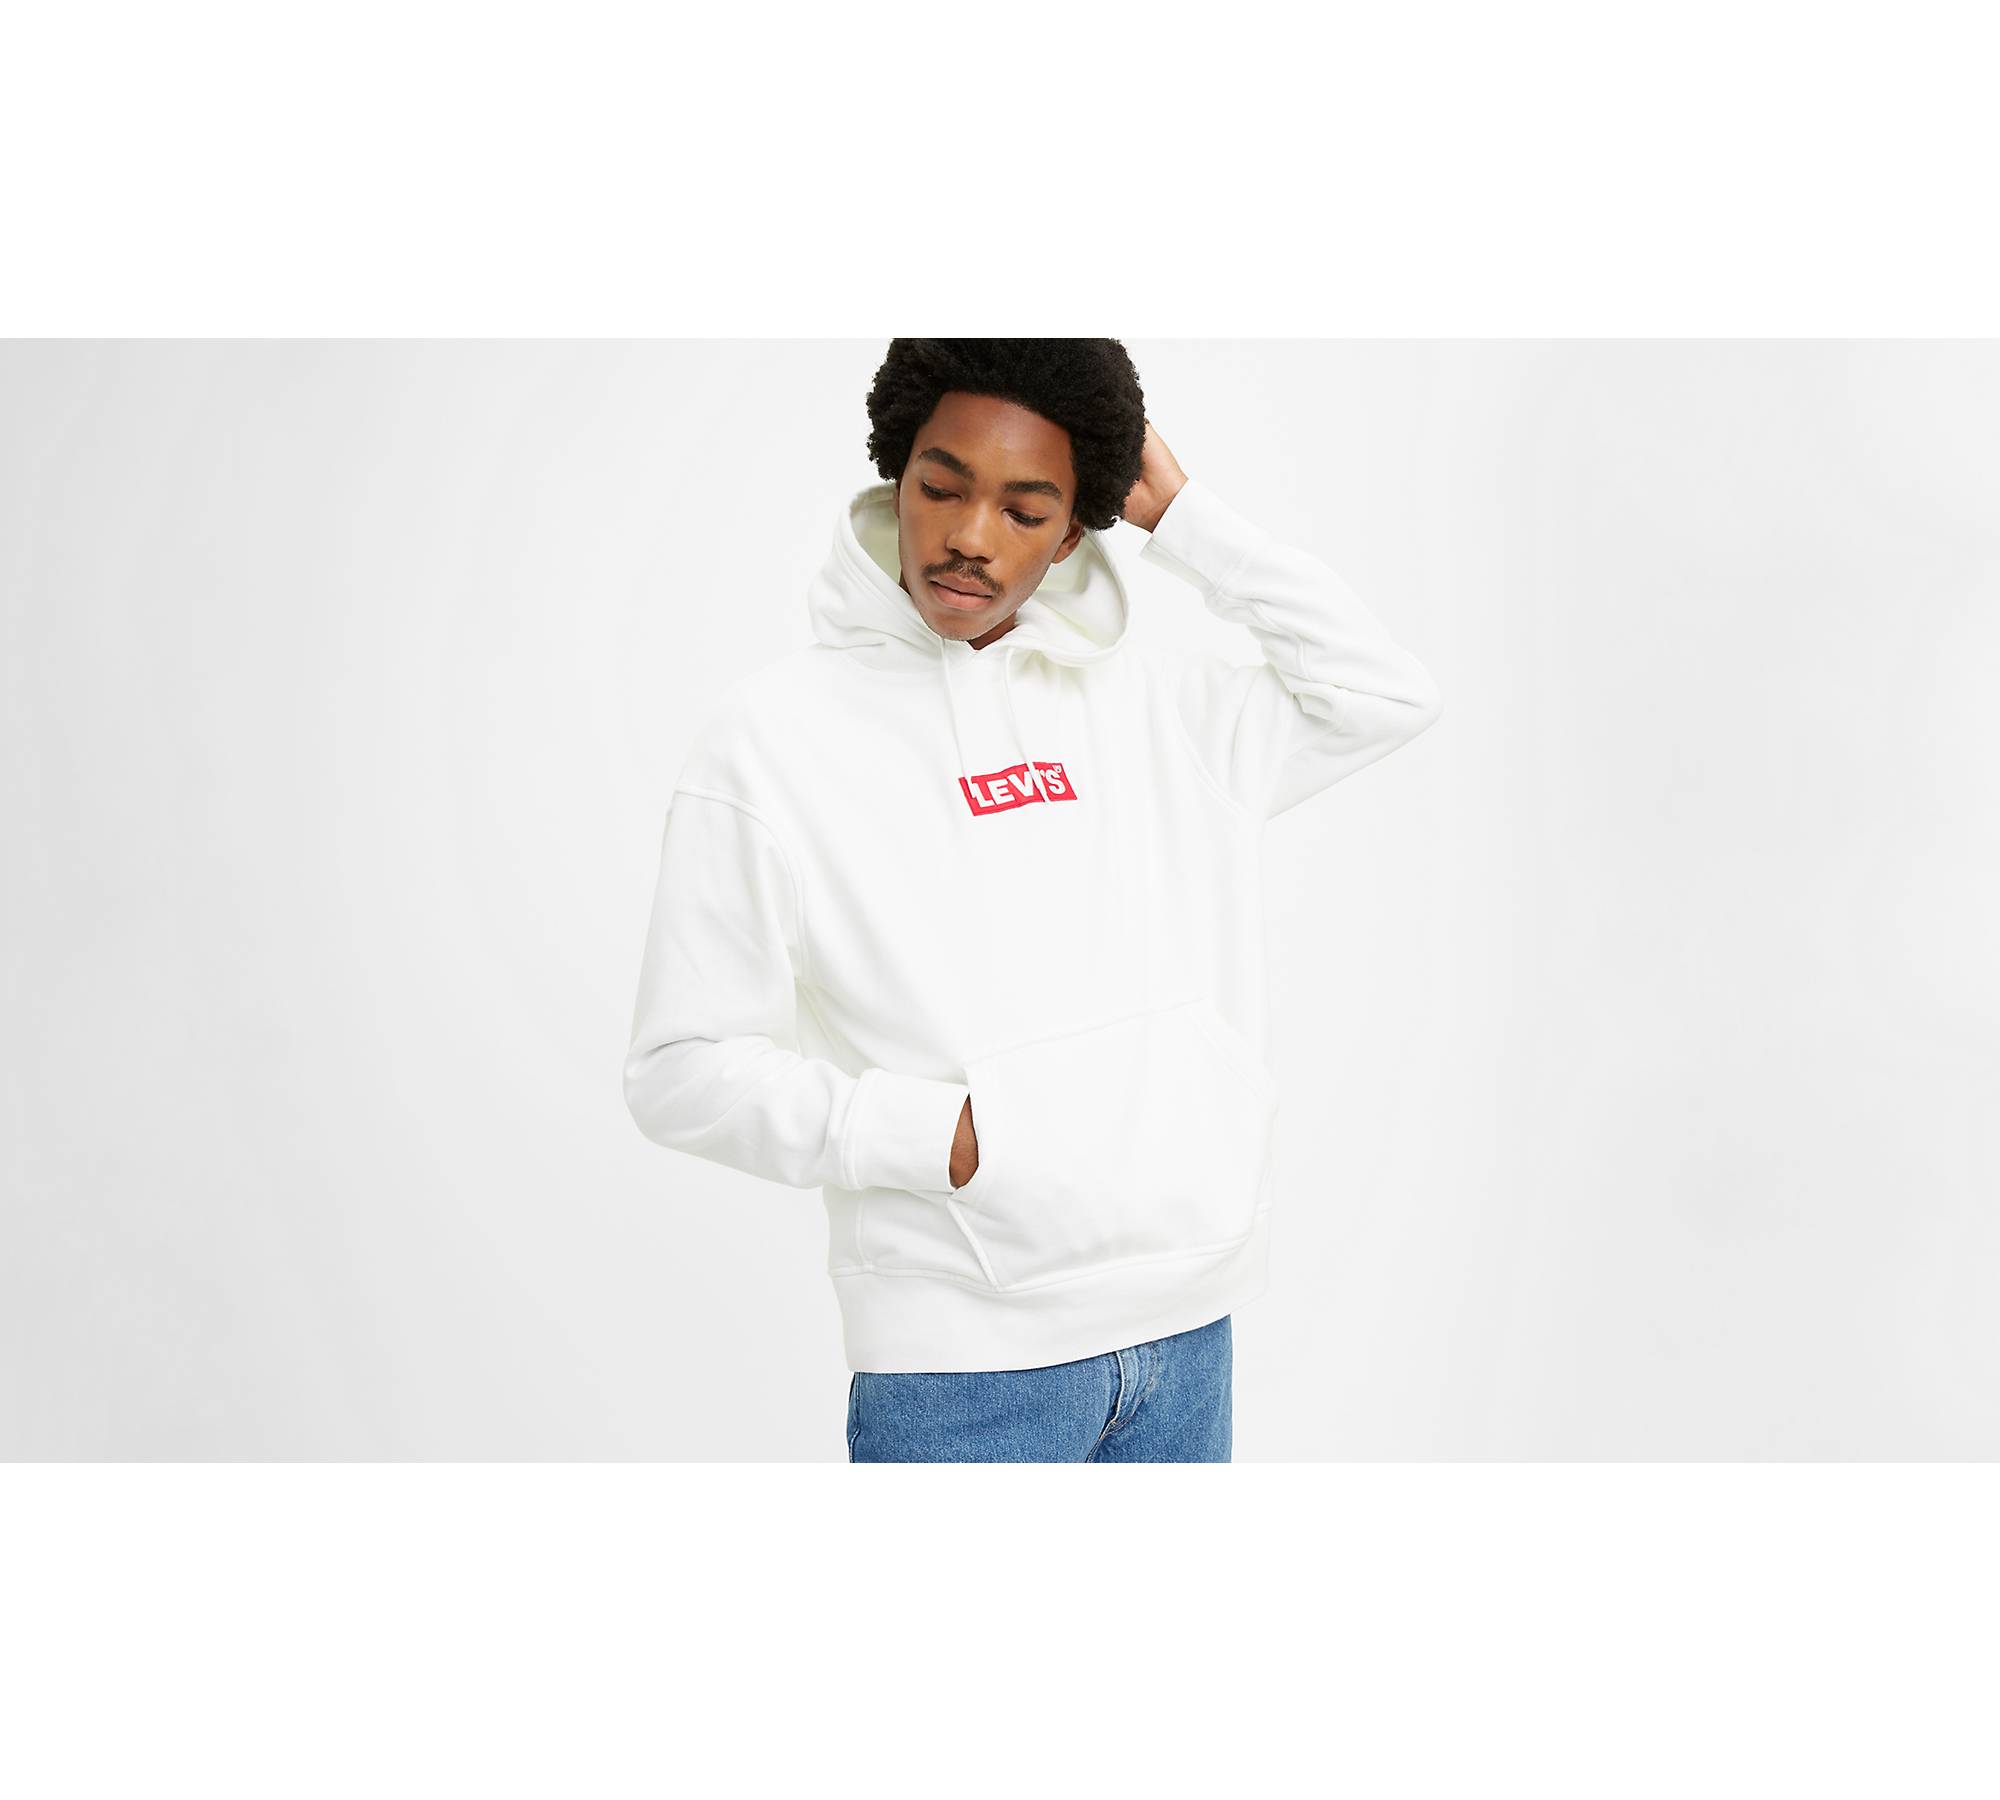 Graphic Pullover Hoodie - Black | Levi's® US